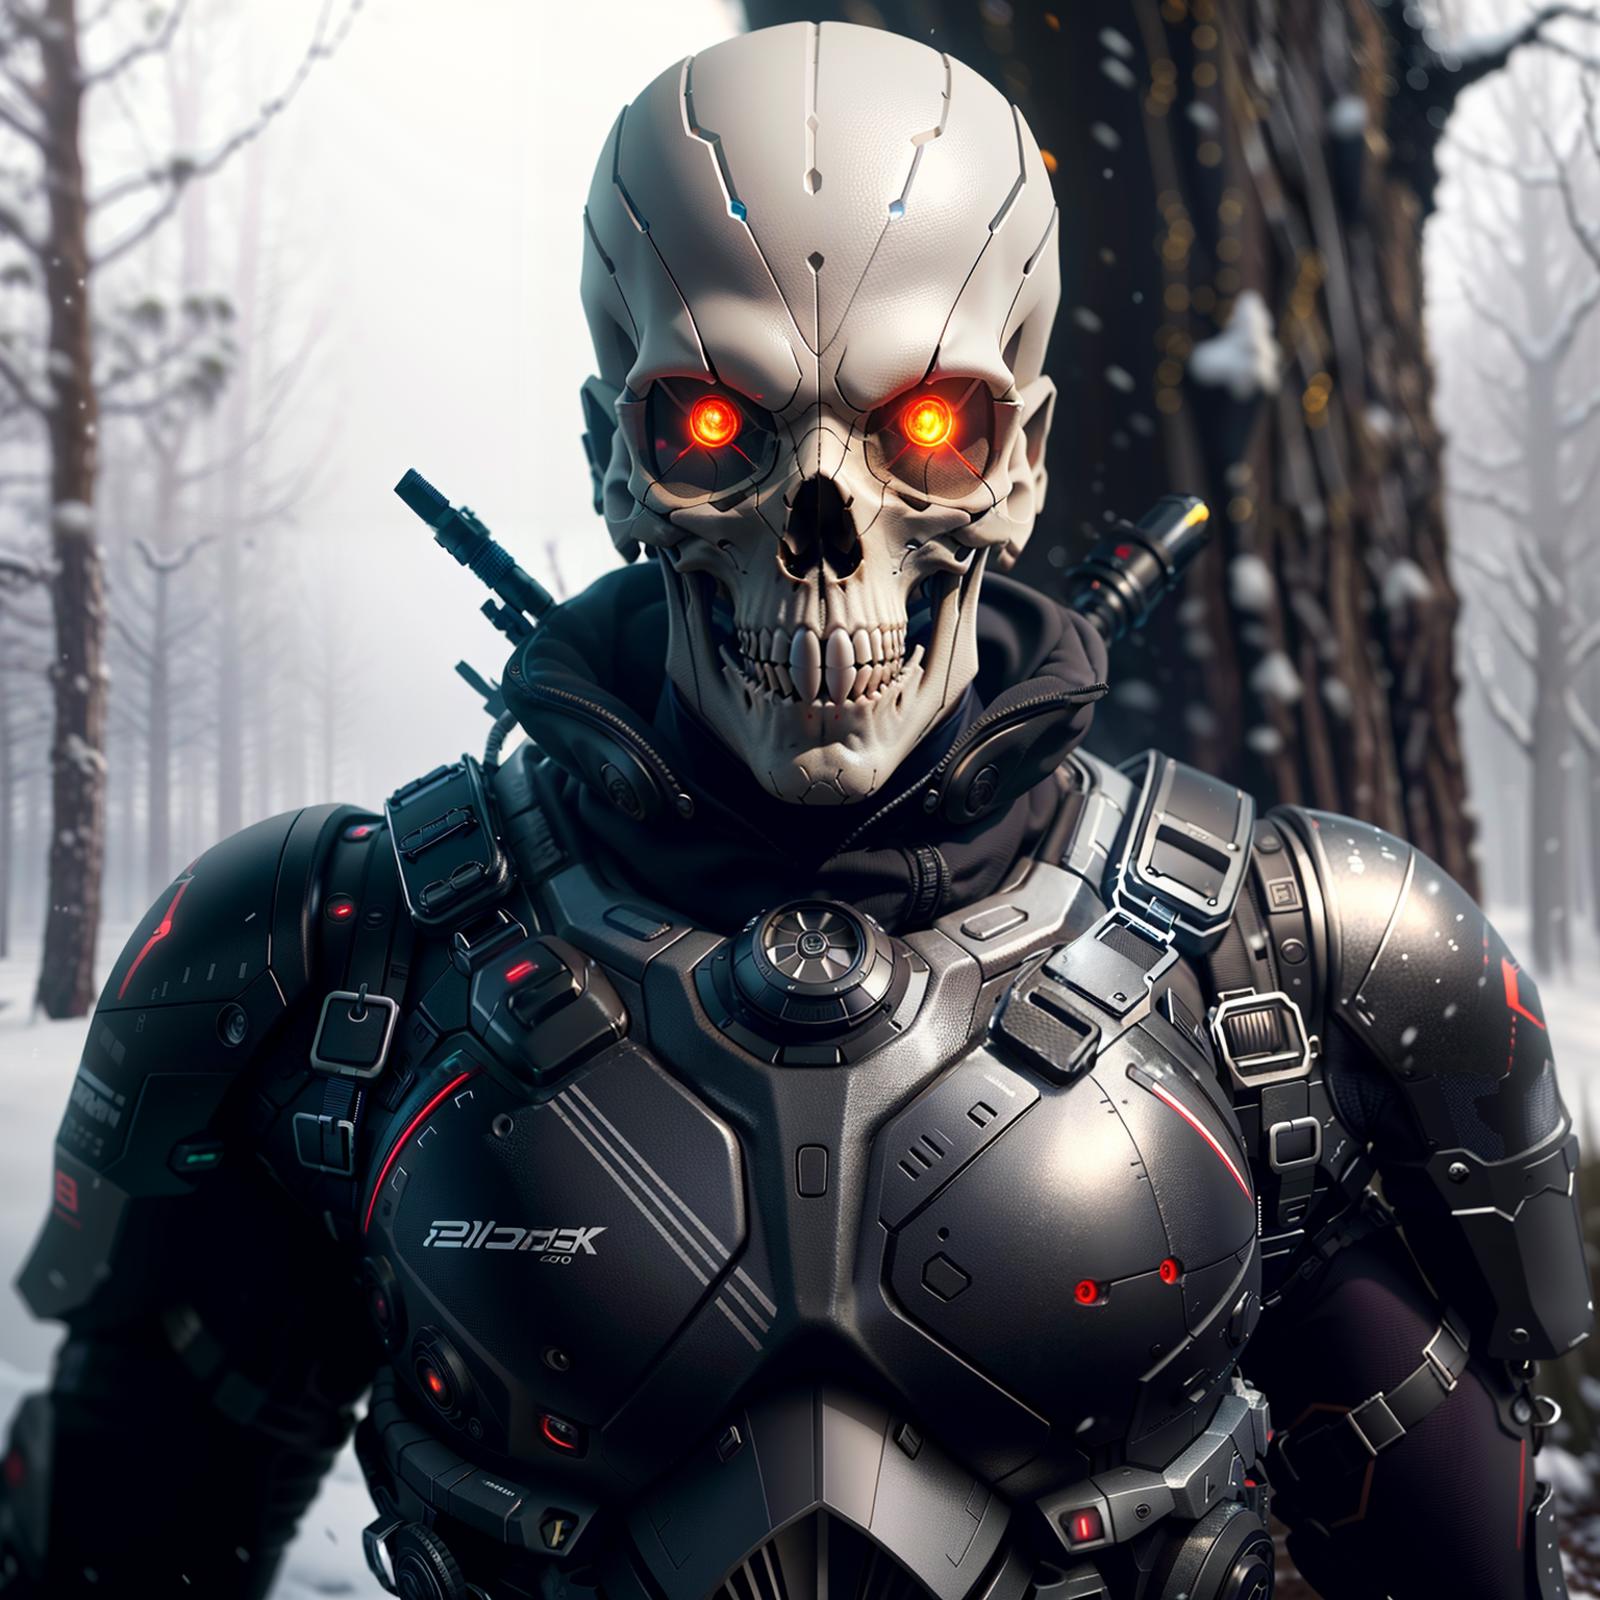 The image features a character with a skull head and a suit of armor, standing in a snowy environment. The skull has red glowing eyes, adding a unique and intriguing element to the scene. The character is wearing a black jacket, and there are several trees in the background, further emphasizing the wintry setting.